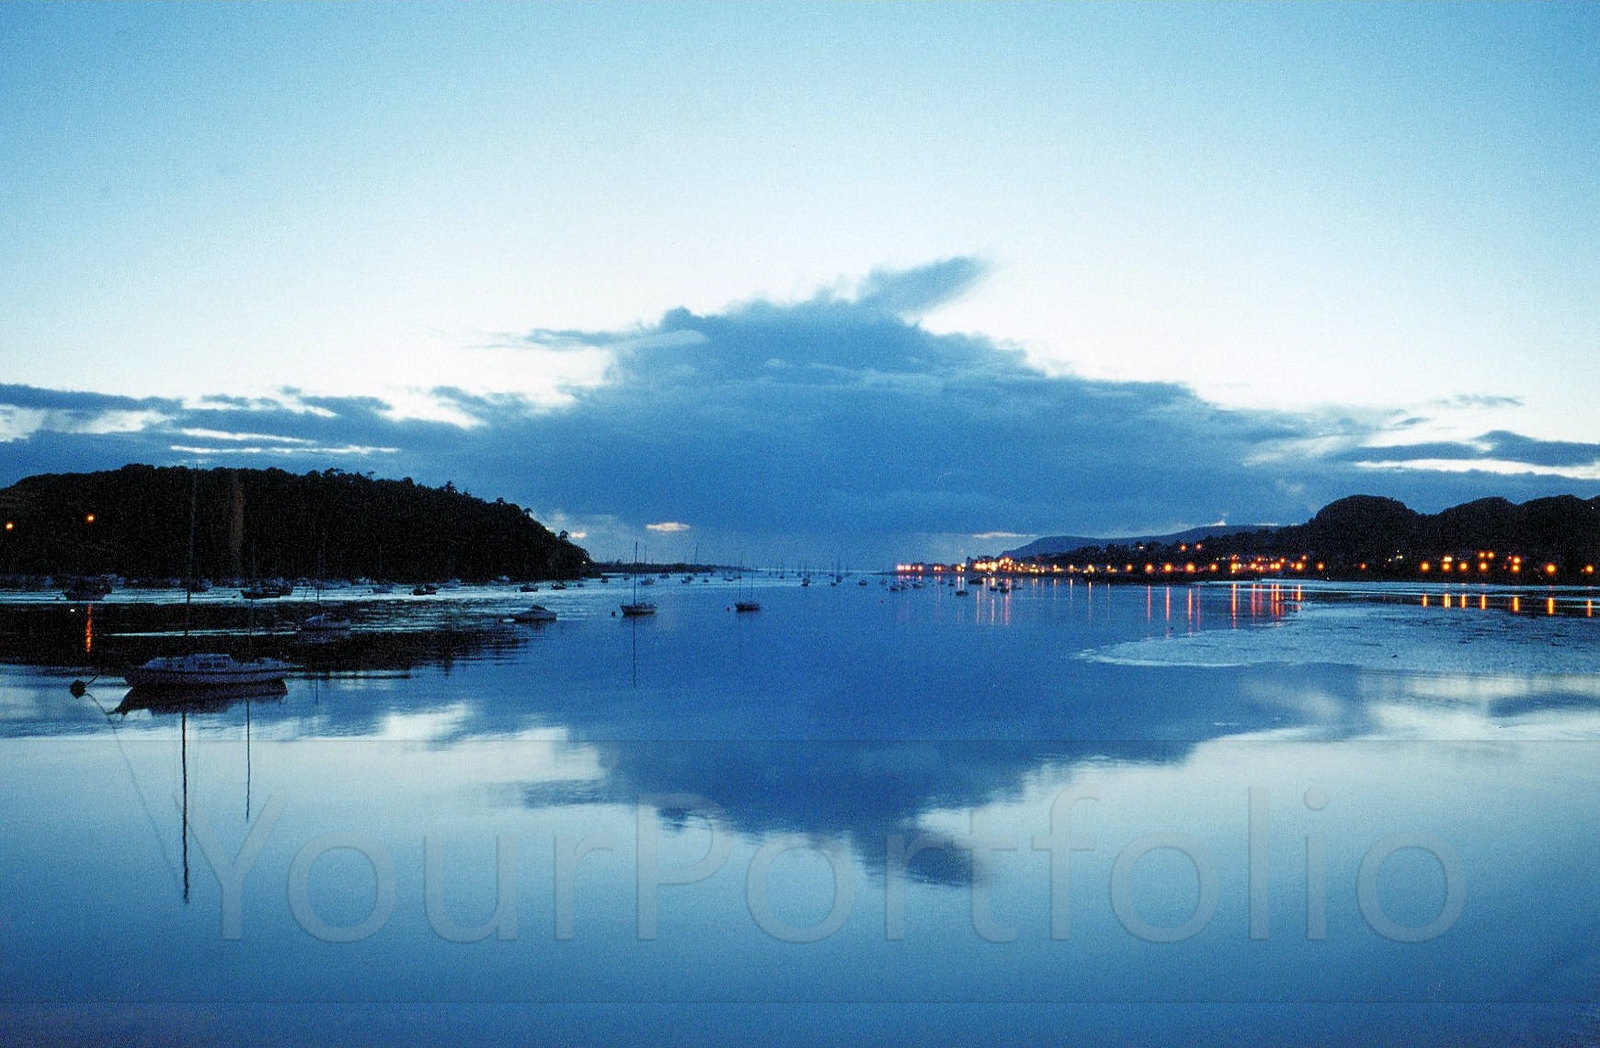 photographer gbjbamc8 landscape  photo taken at Conwy,